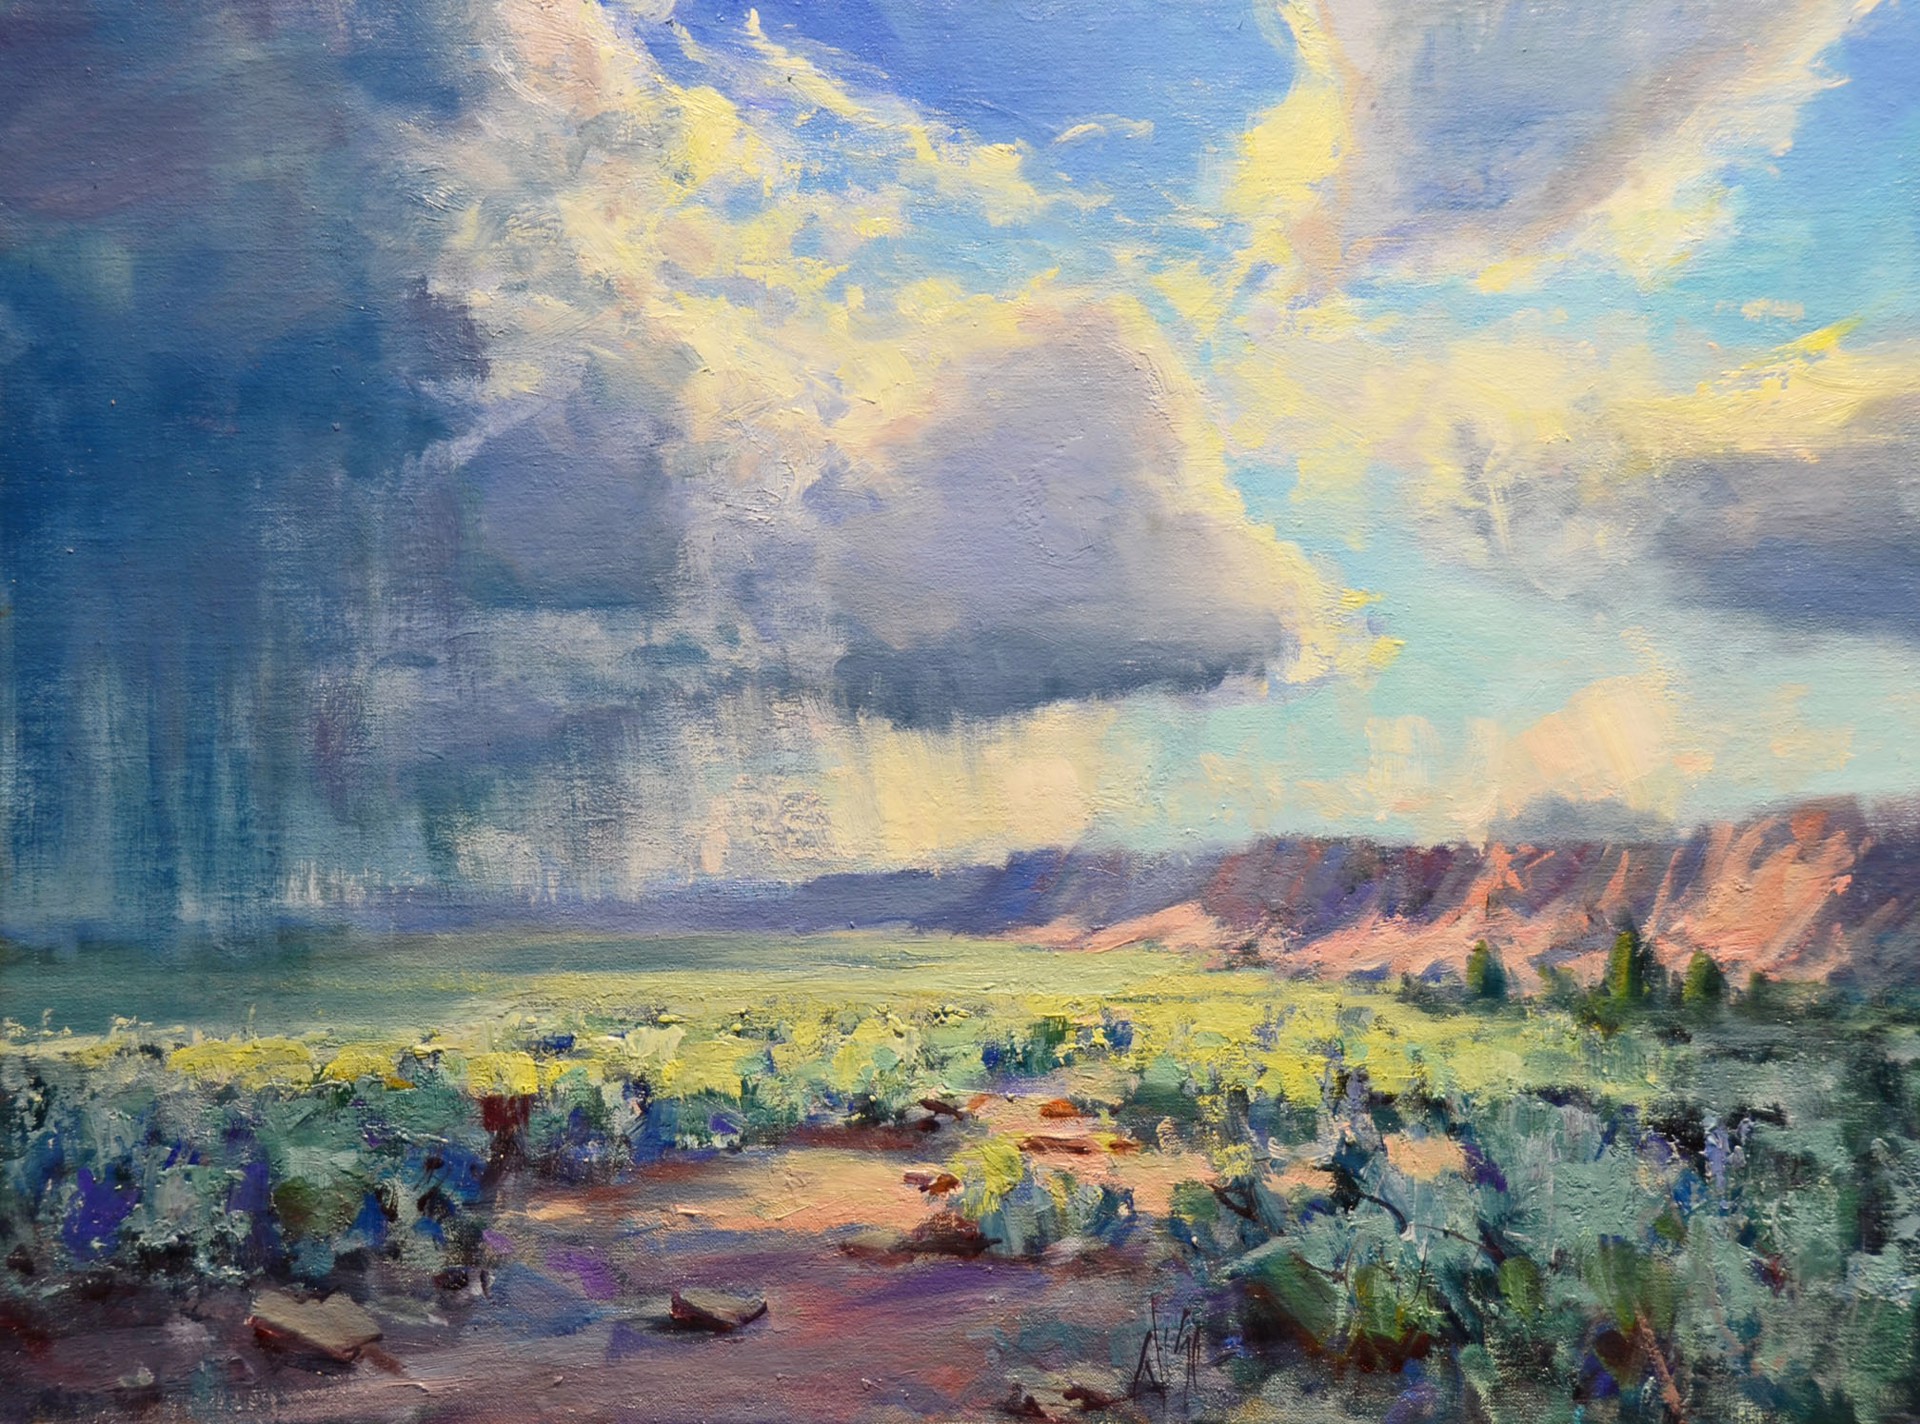 High Desert Storm by Mike Wise